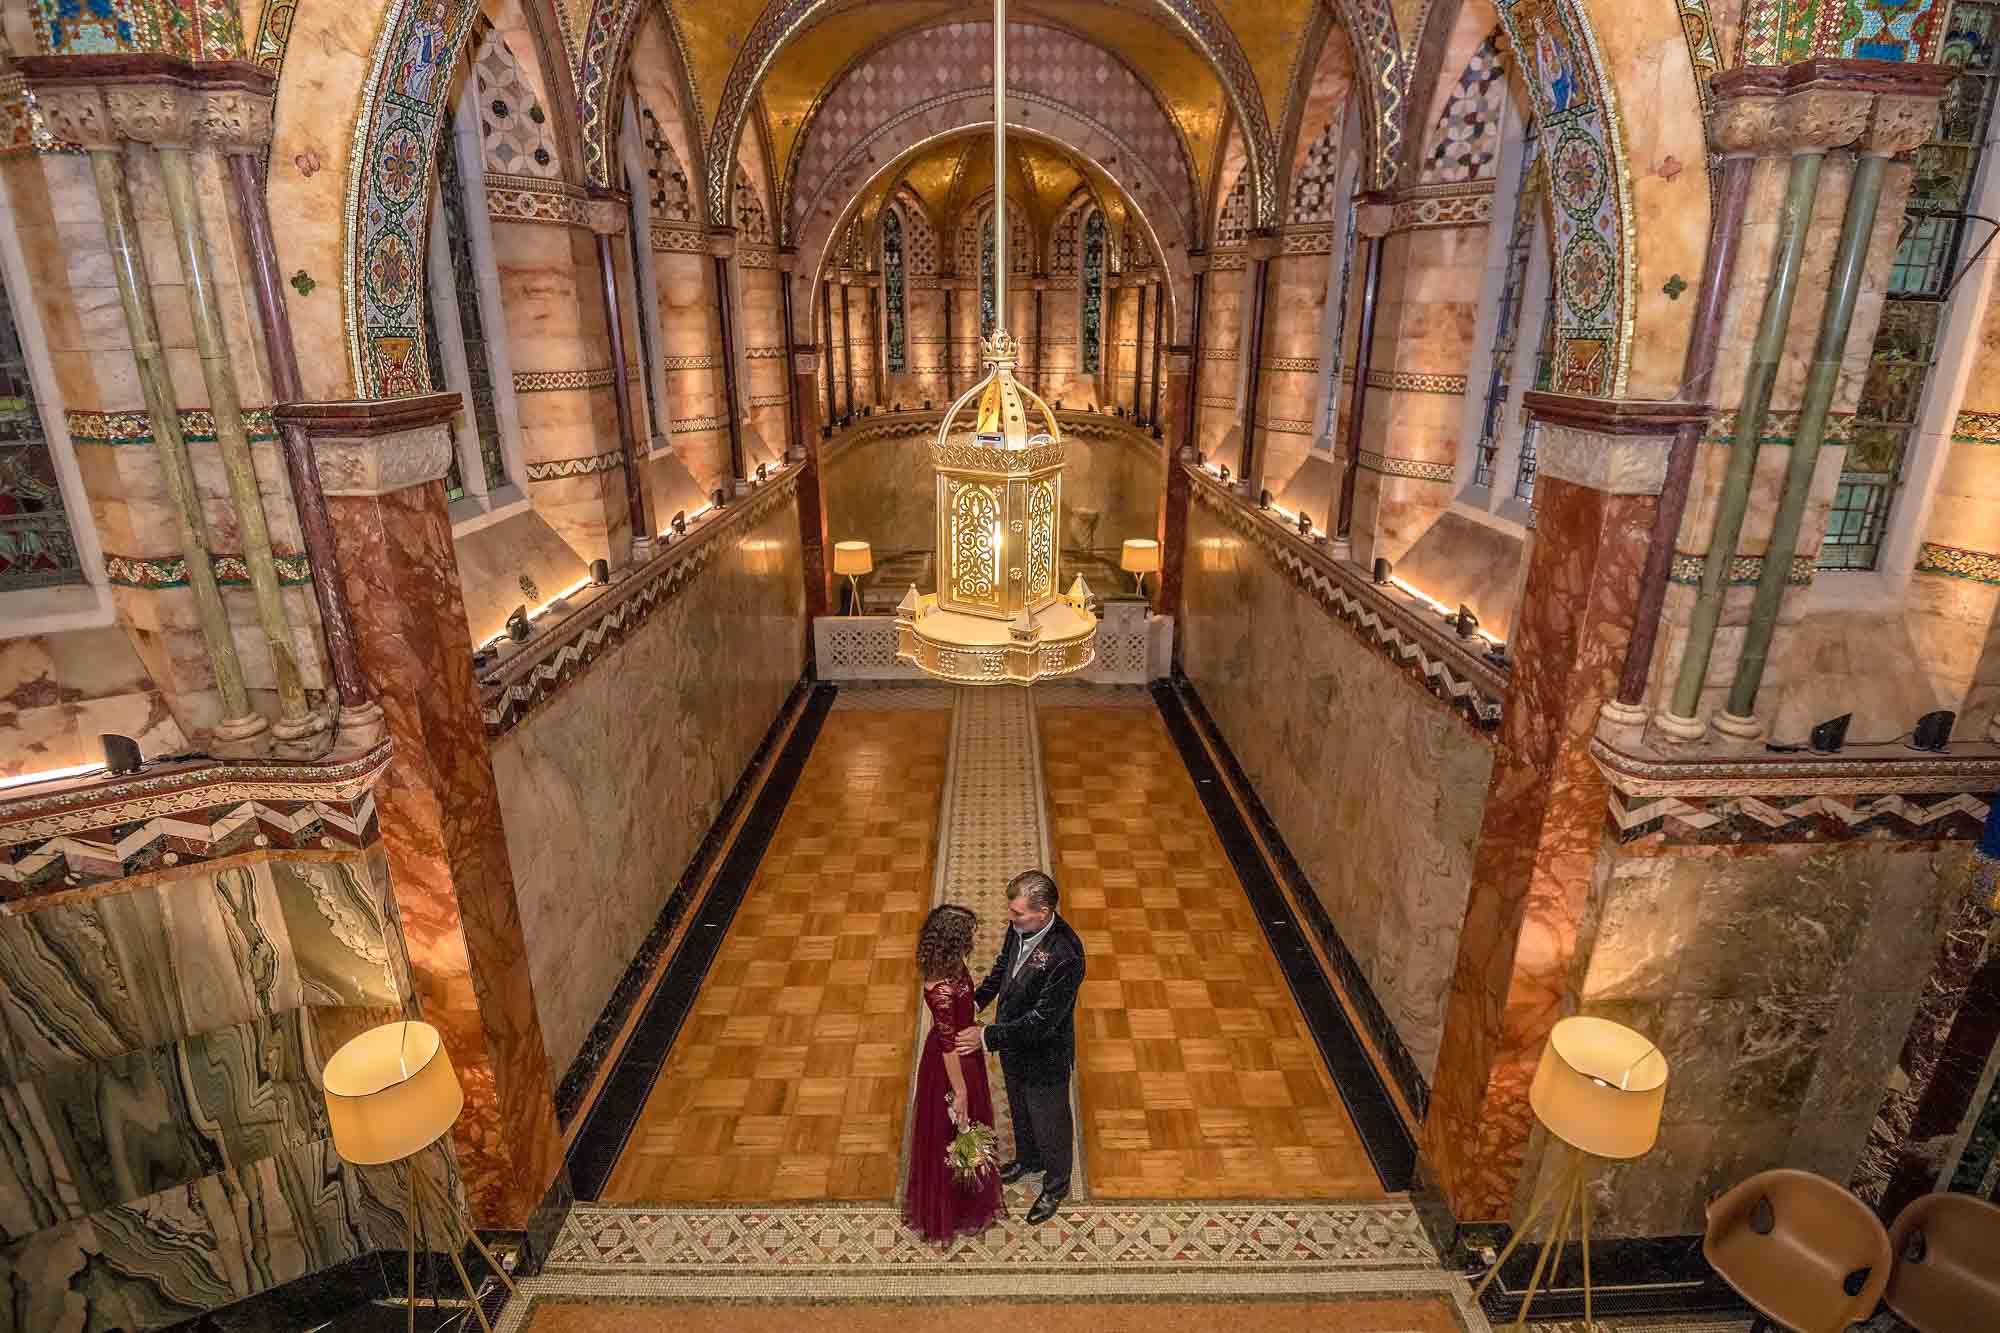 The groom holds his bride at their short wedding in Fitzrovia Chapel in Central London - taken from the balcony.